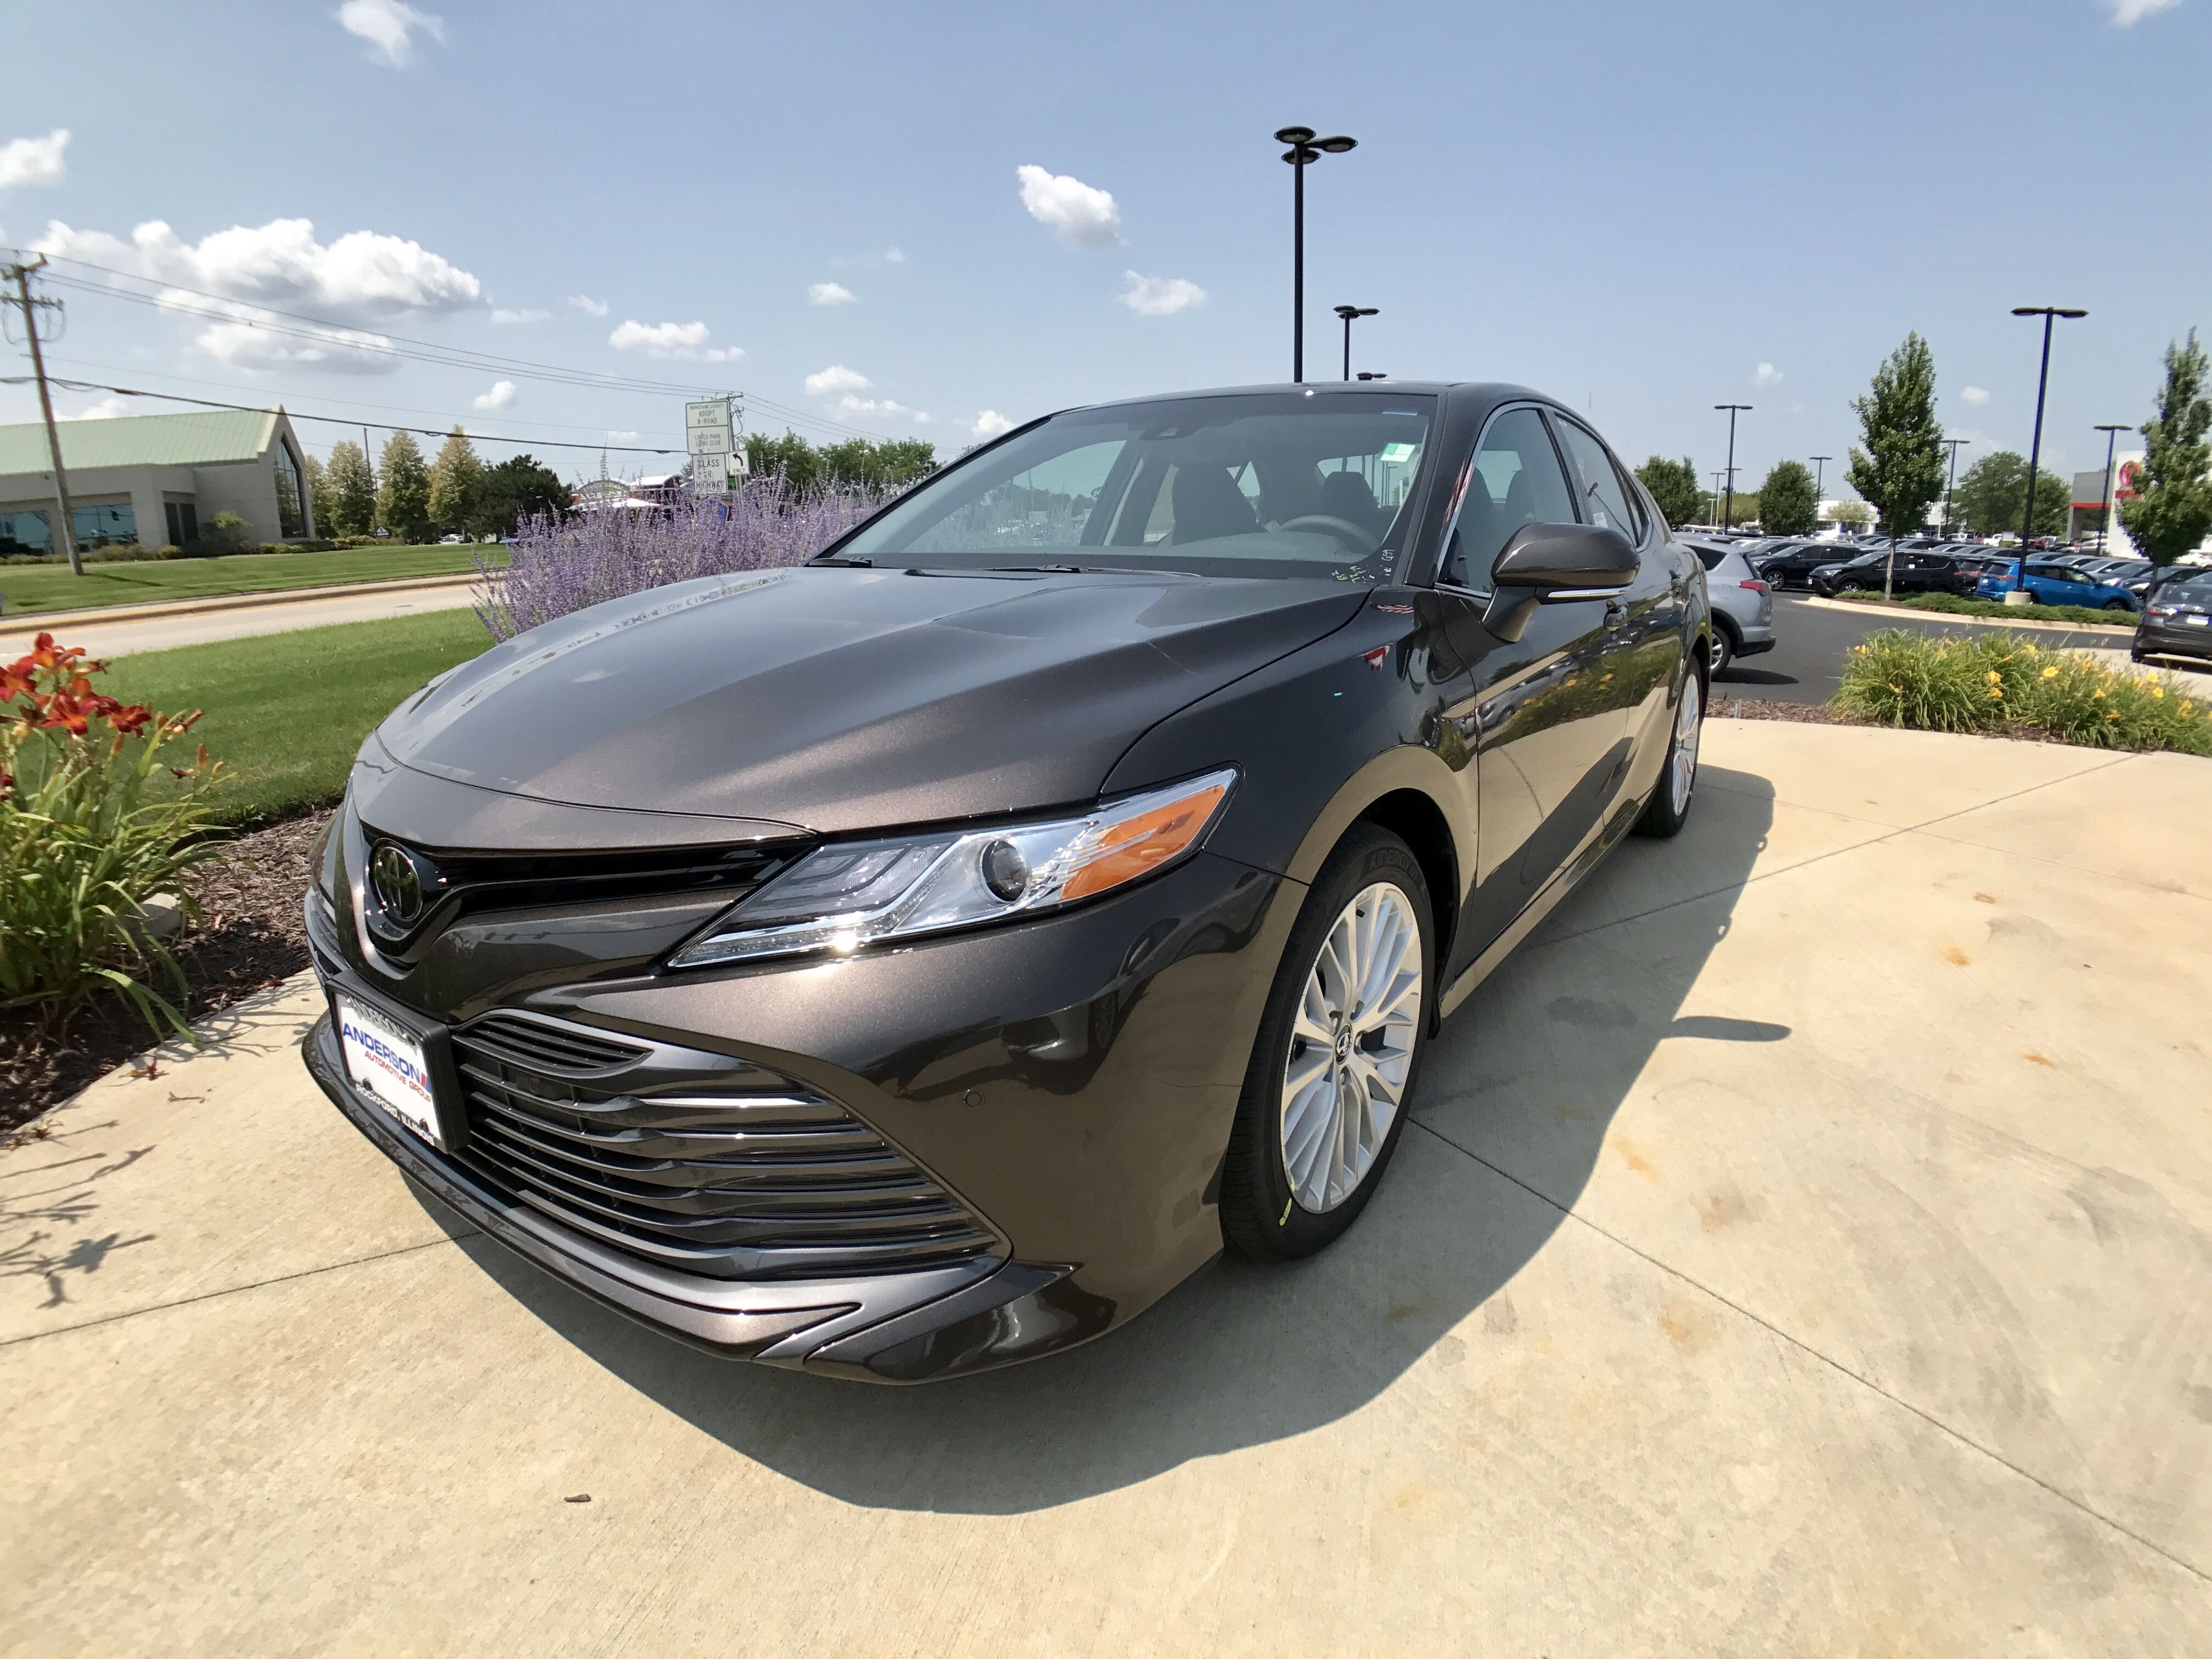 2018 Toyota Camry Brownstone XLE